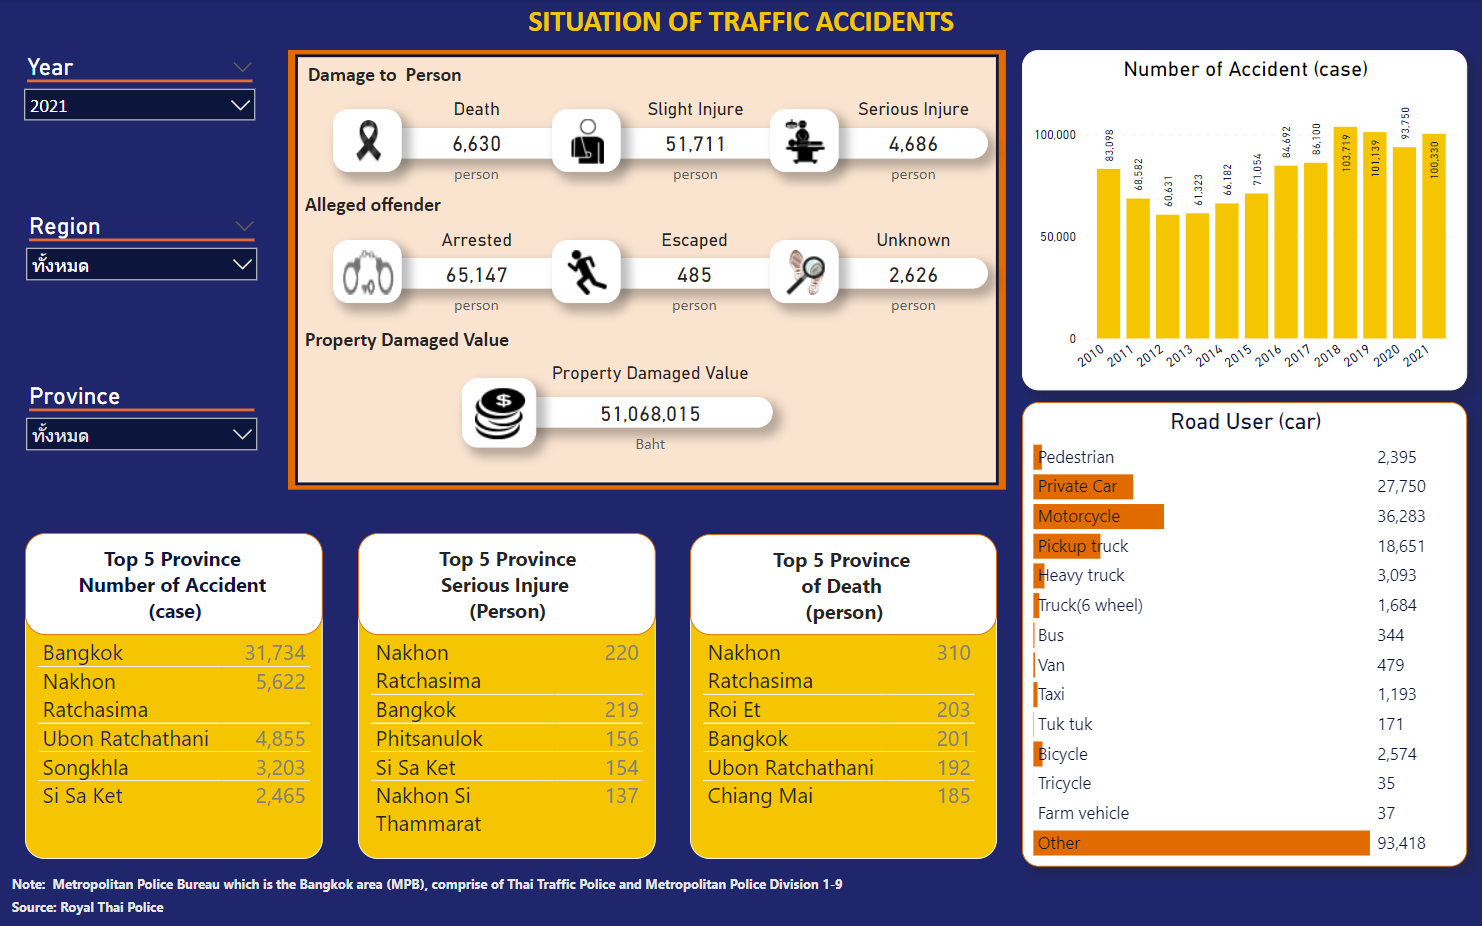 SITUATION OF TRAFFIC ACCIDENTS